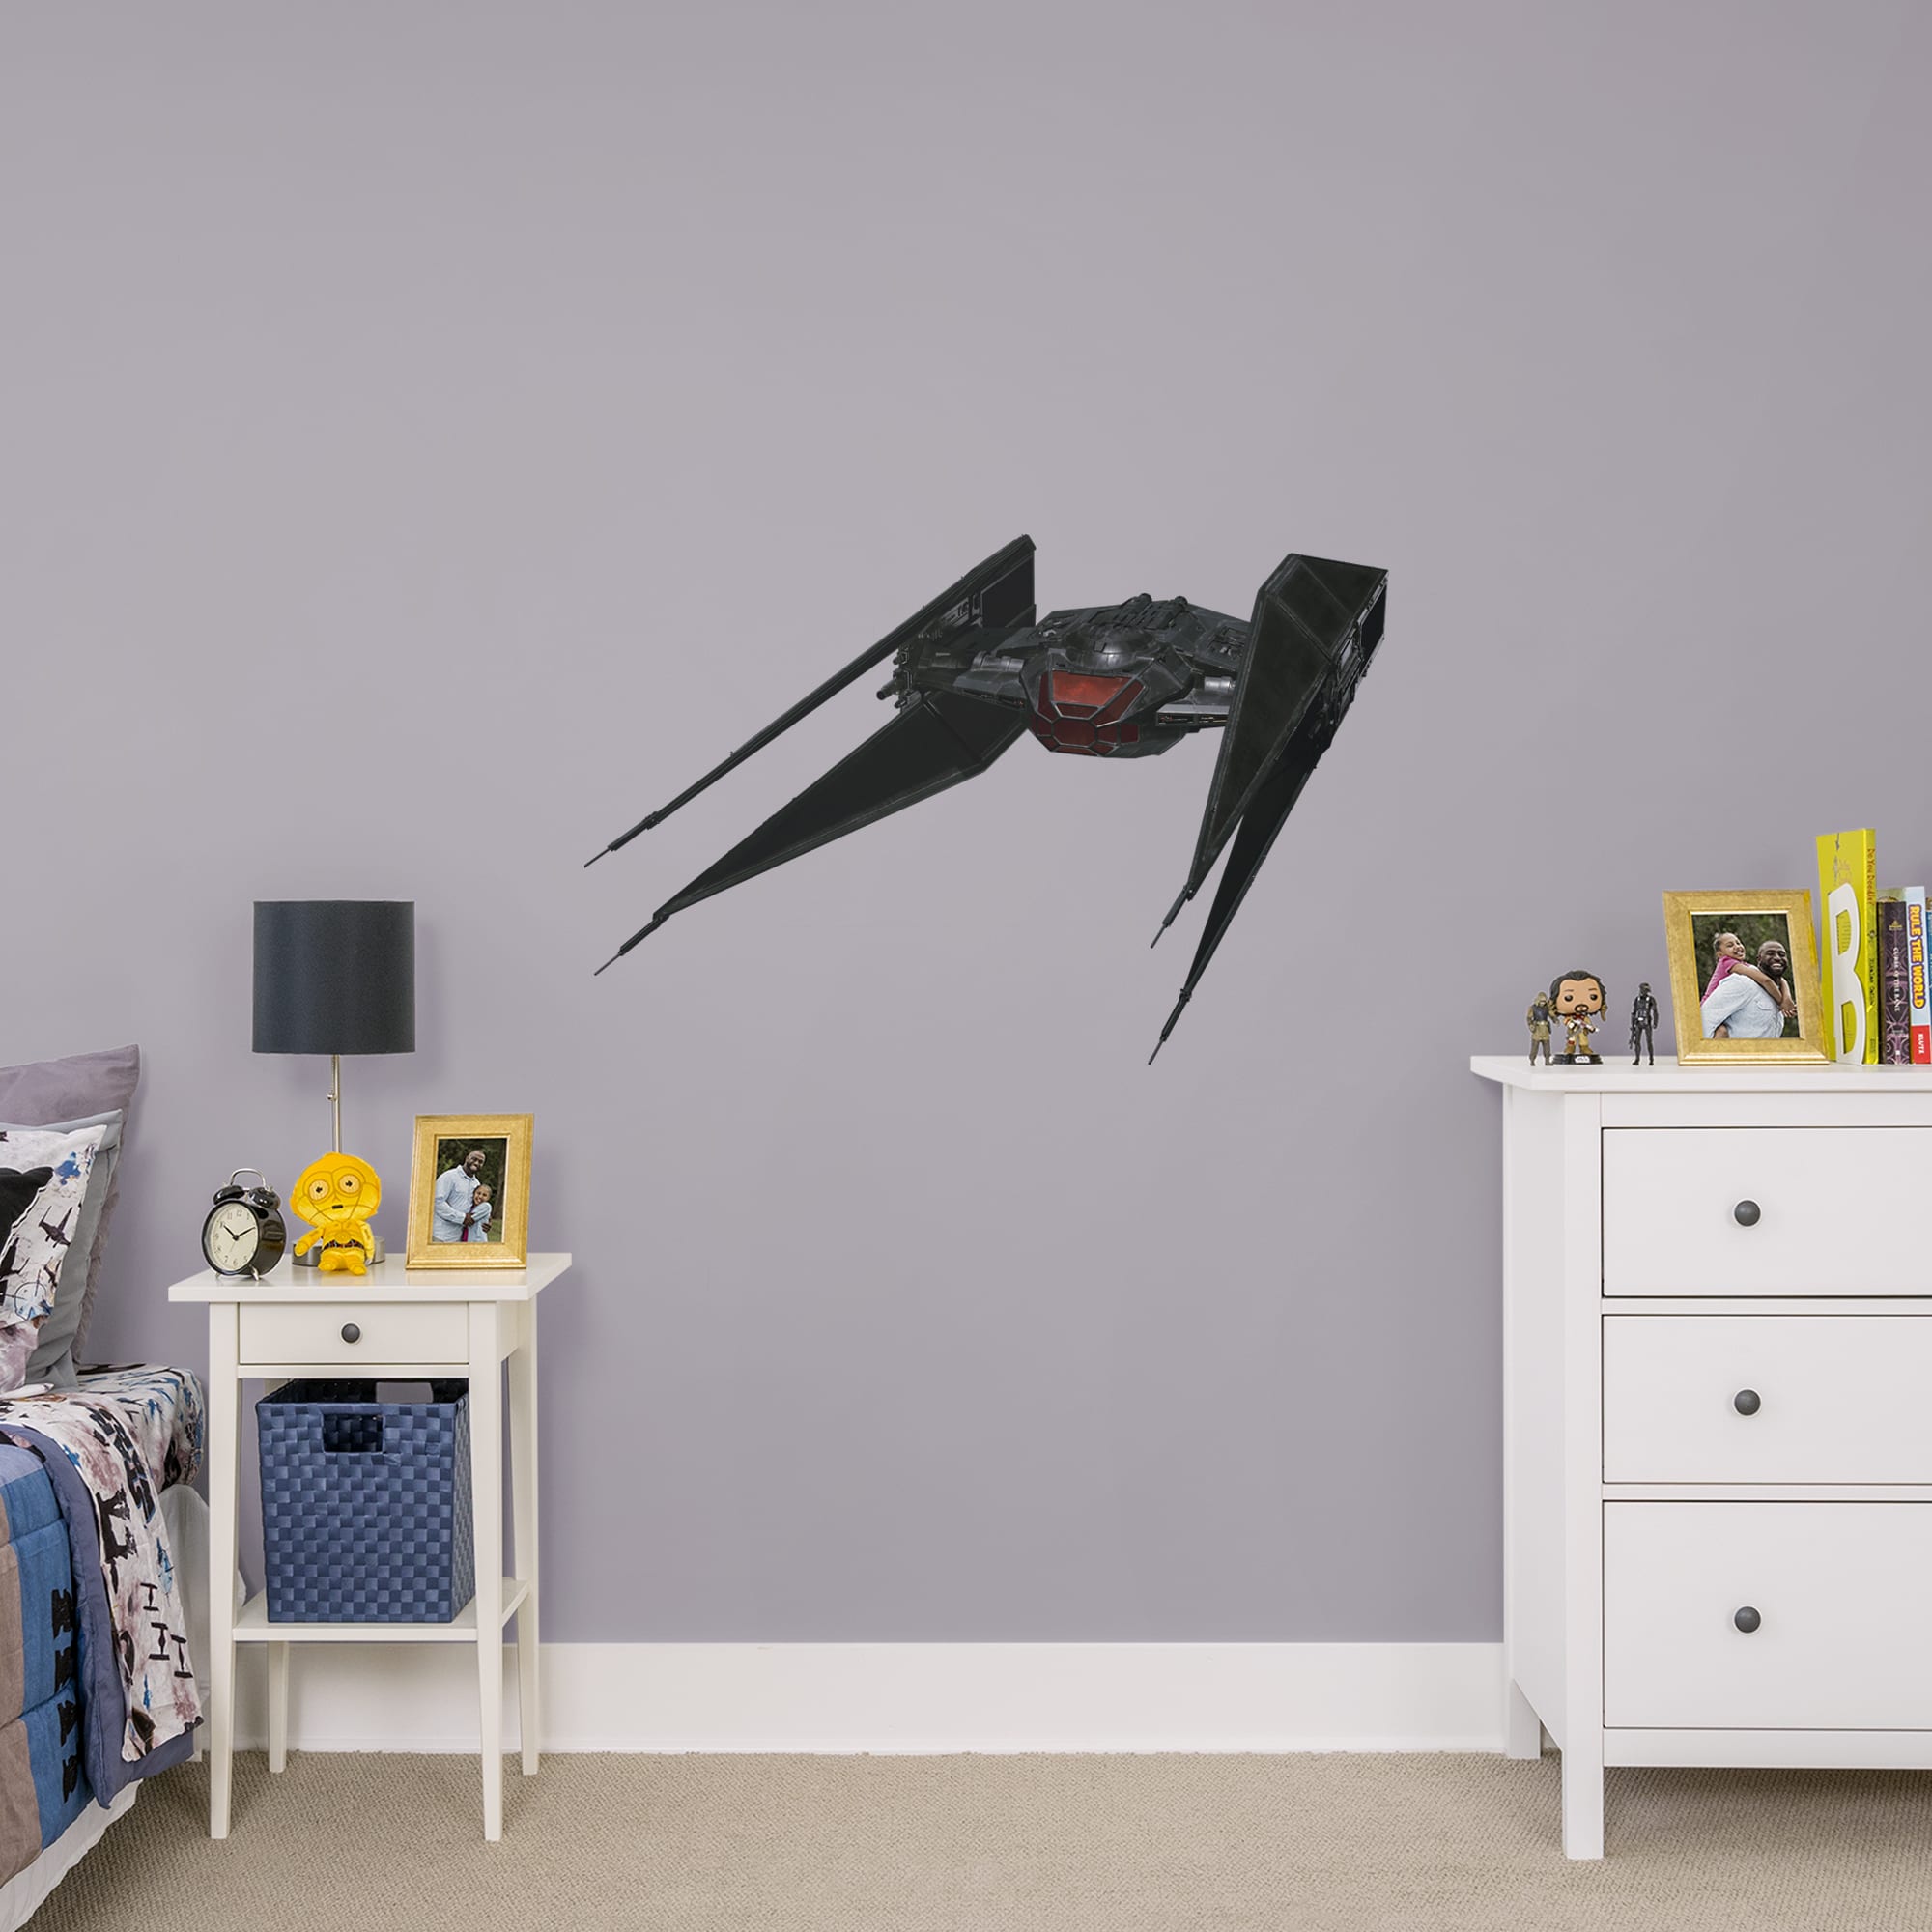 TIE Silencer - Officially Licensed Removable Wall Decal Giant Ship + 2 Decals (47"W x 31"H) by Fathead | Vinyl